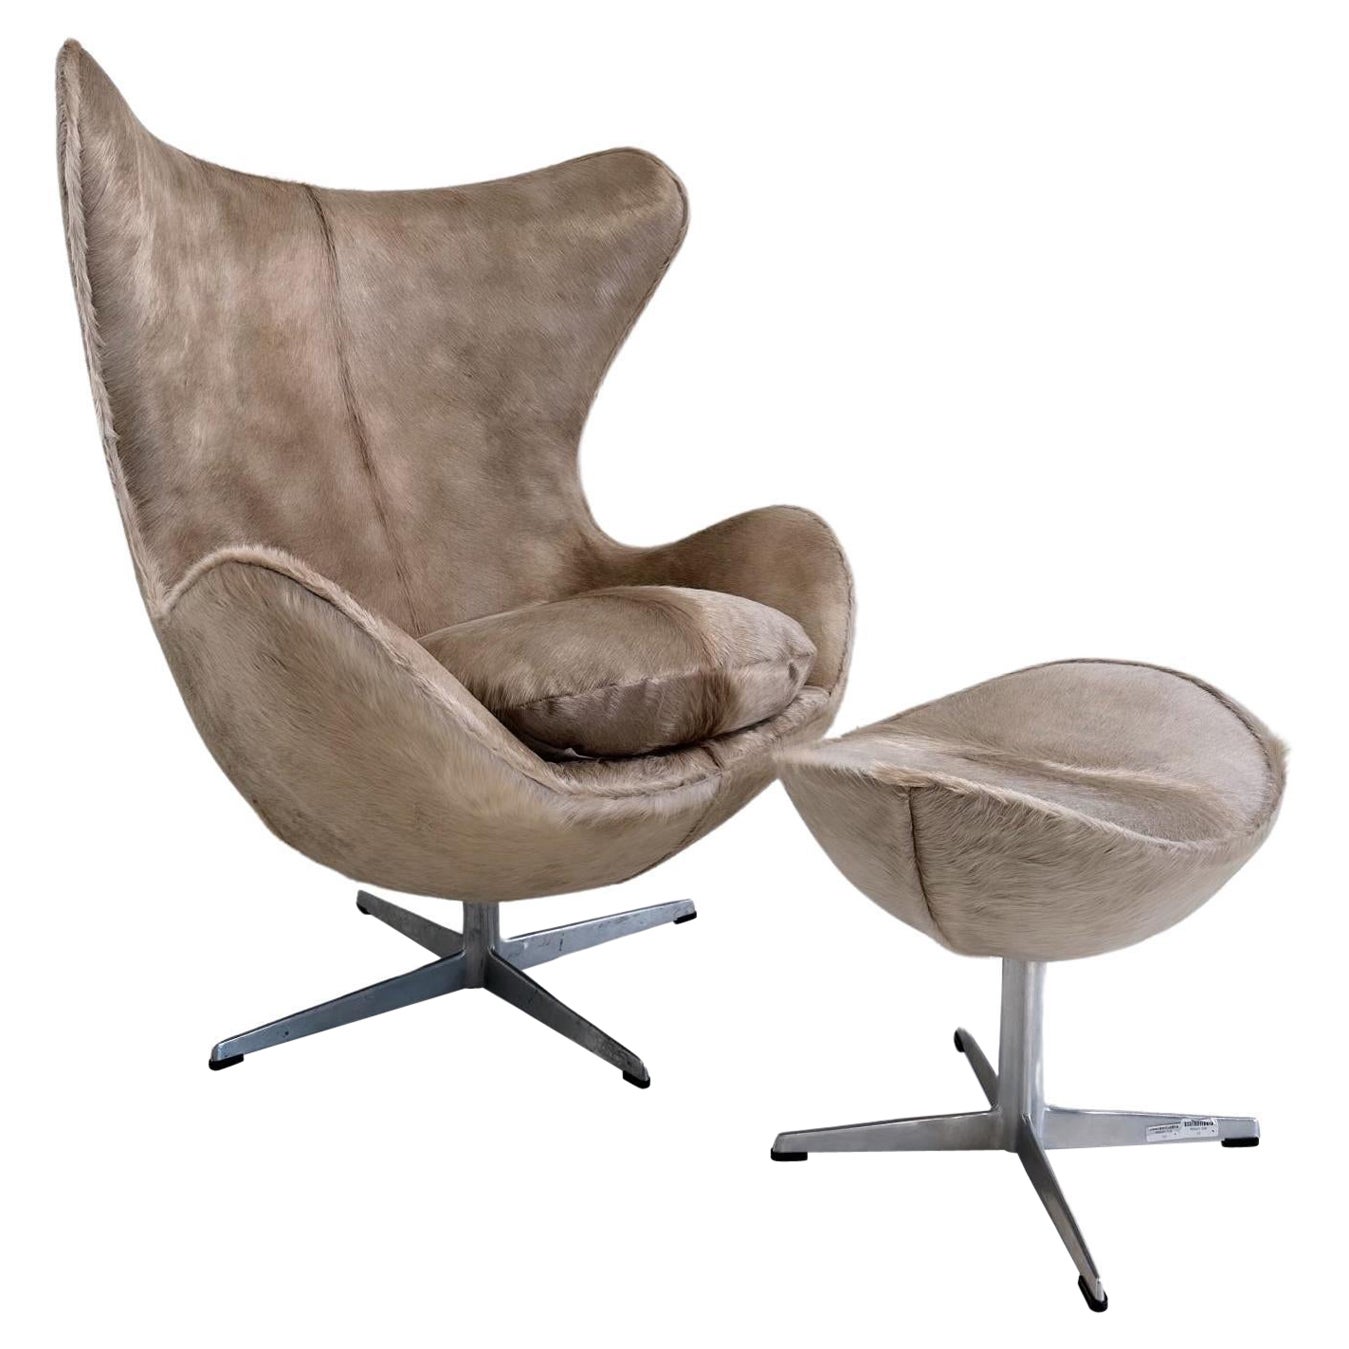 Forsyth Arne Jacobsen Egg Chair and Ottoman in Brazilian Cowhide